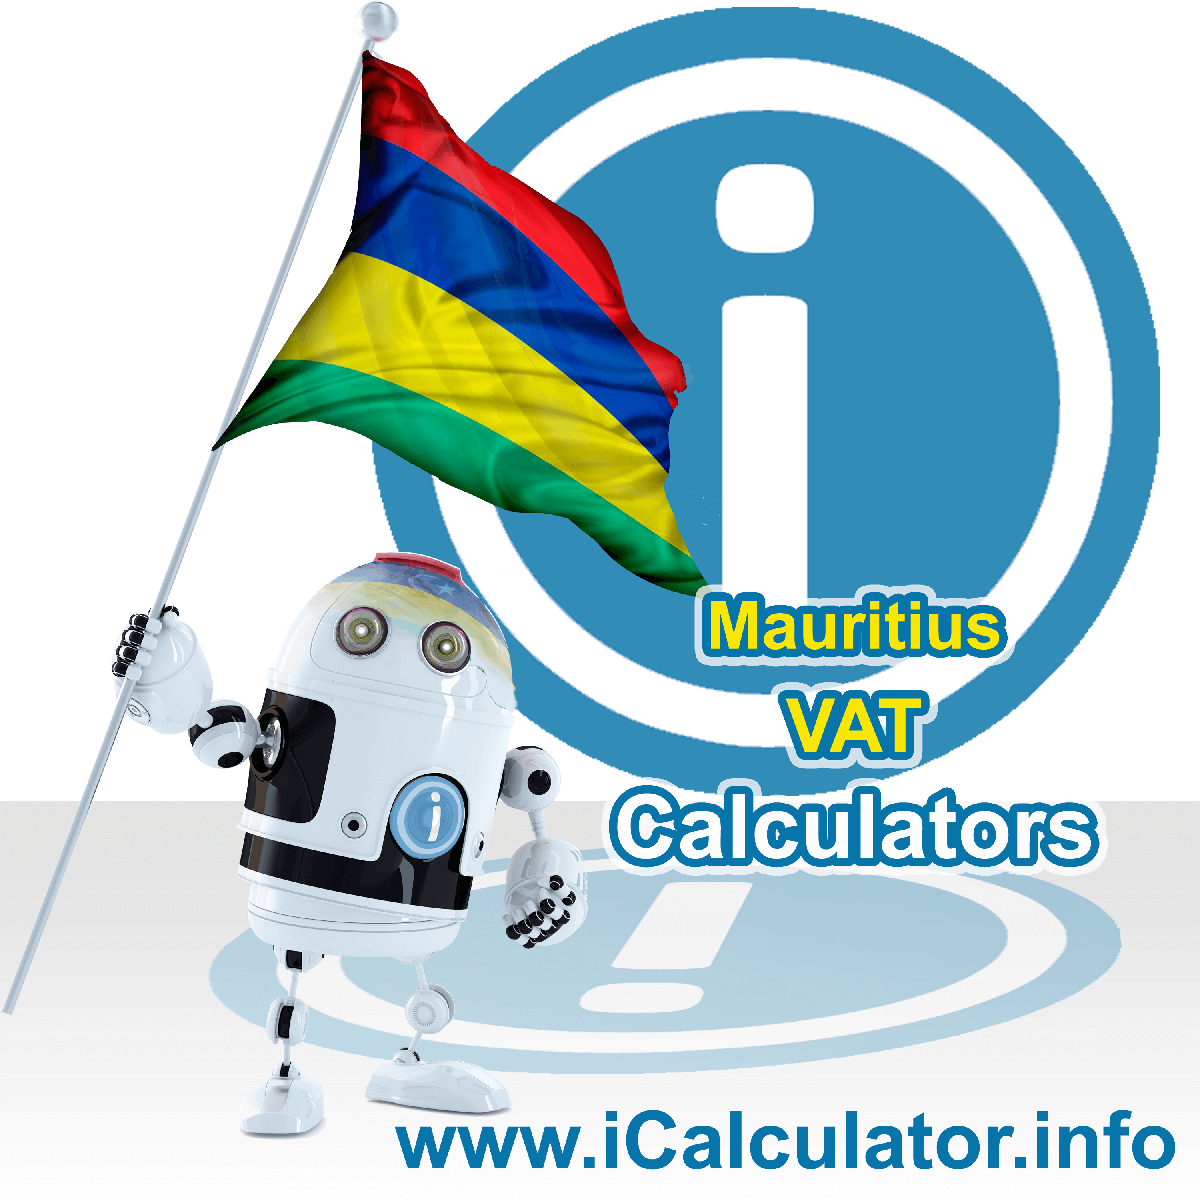 Mauritius VAT Calculator. This image shows the Mauritius flag and information relating to the VAT formula used for calculating Value Added Tax in Mauritius using the Mauritius VAT Calculator in 2023